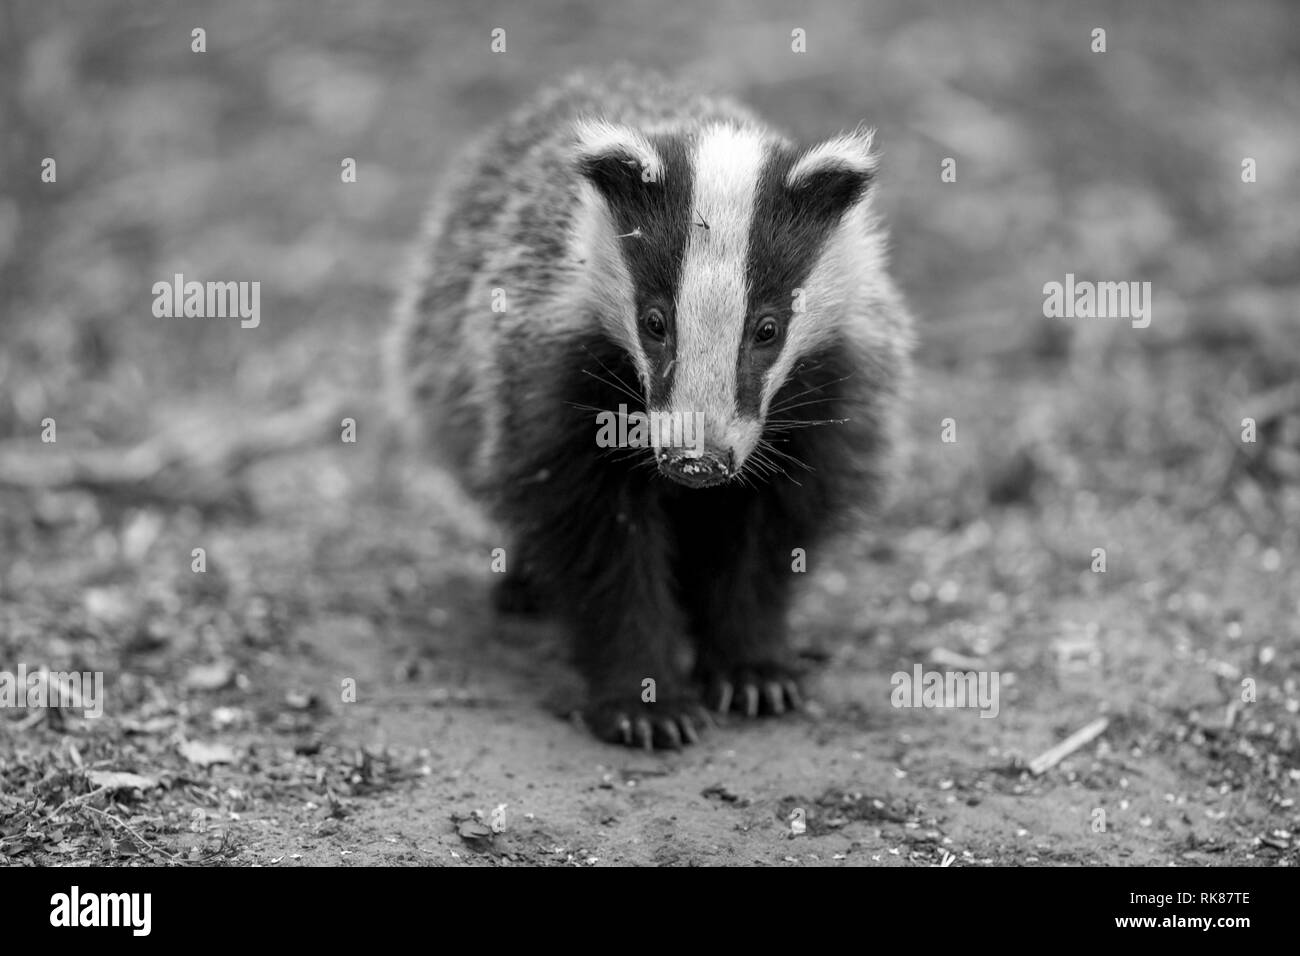 Badger cub in black and white.  Scientific name: Meles meles.  In natural woodland habitat foraging for food. Badger cub is 5 months old. Landscape Stock Photo